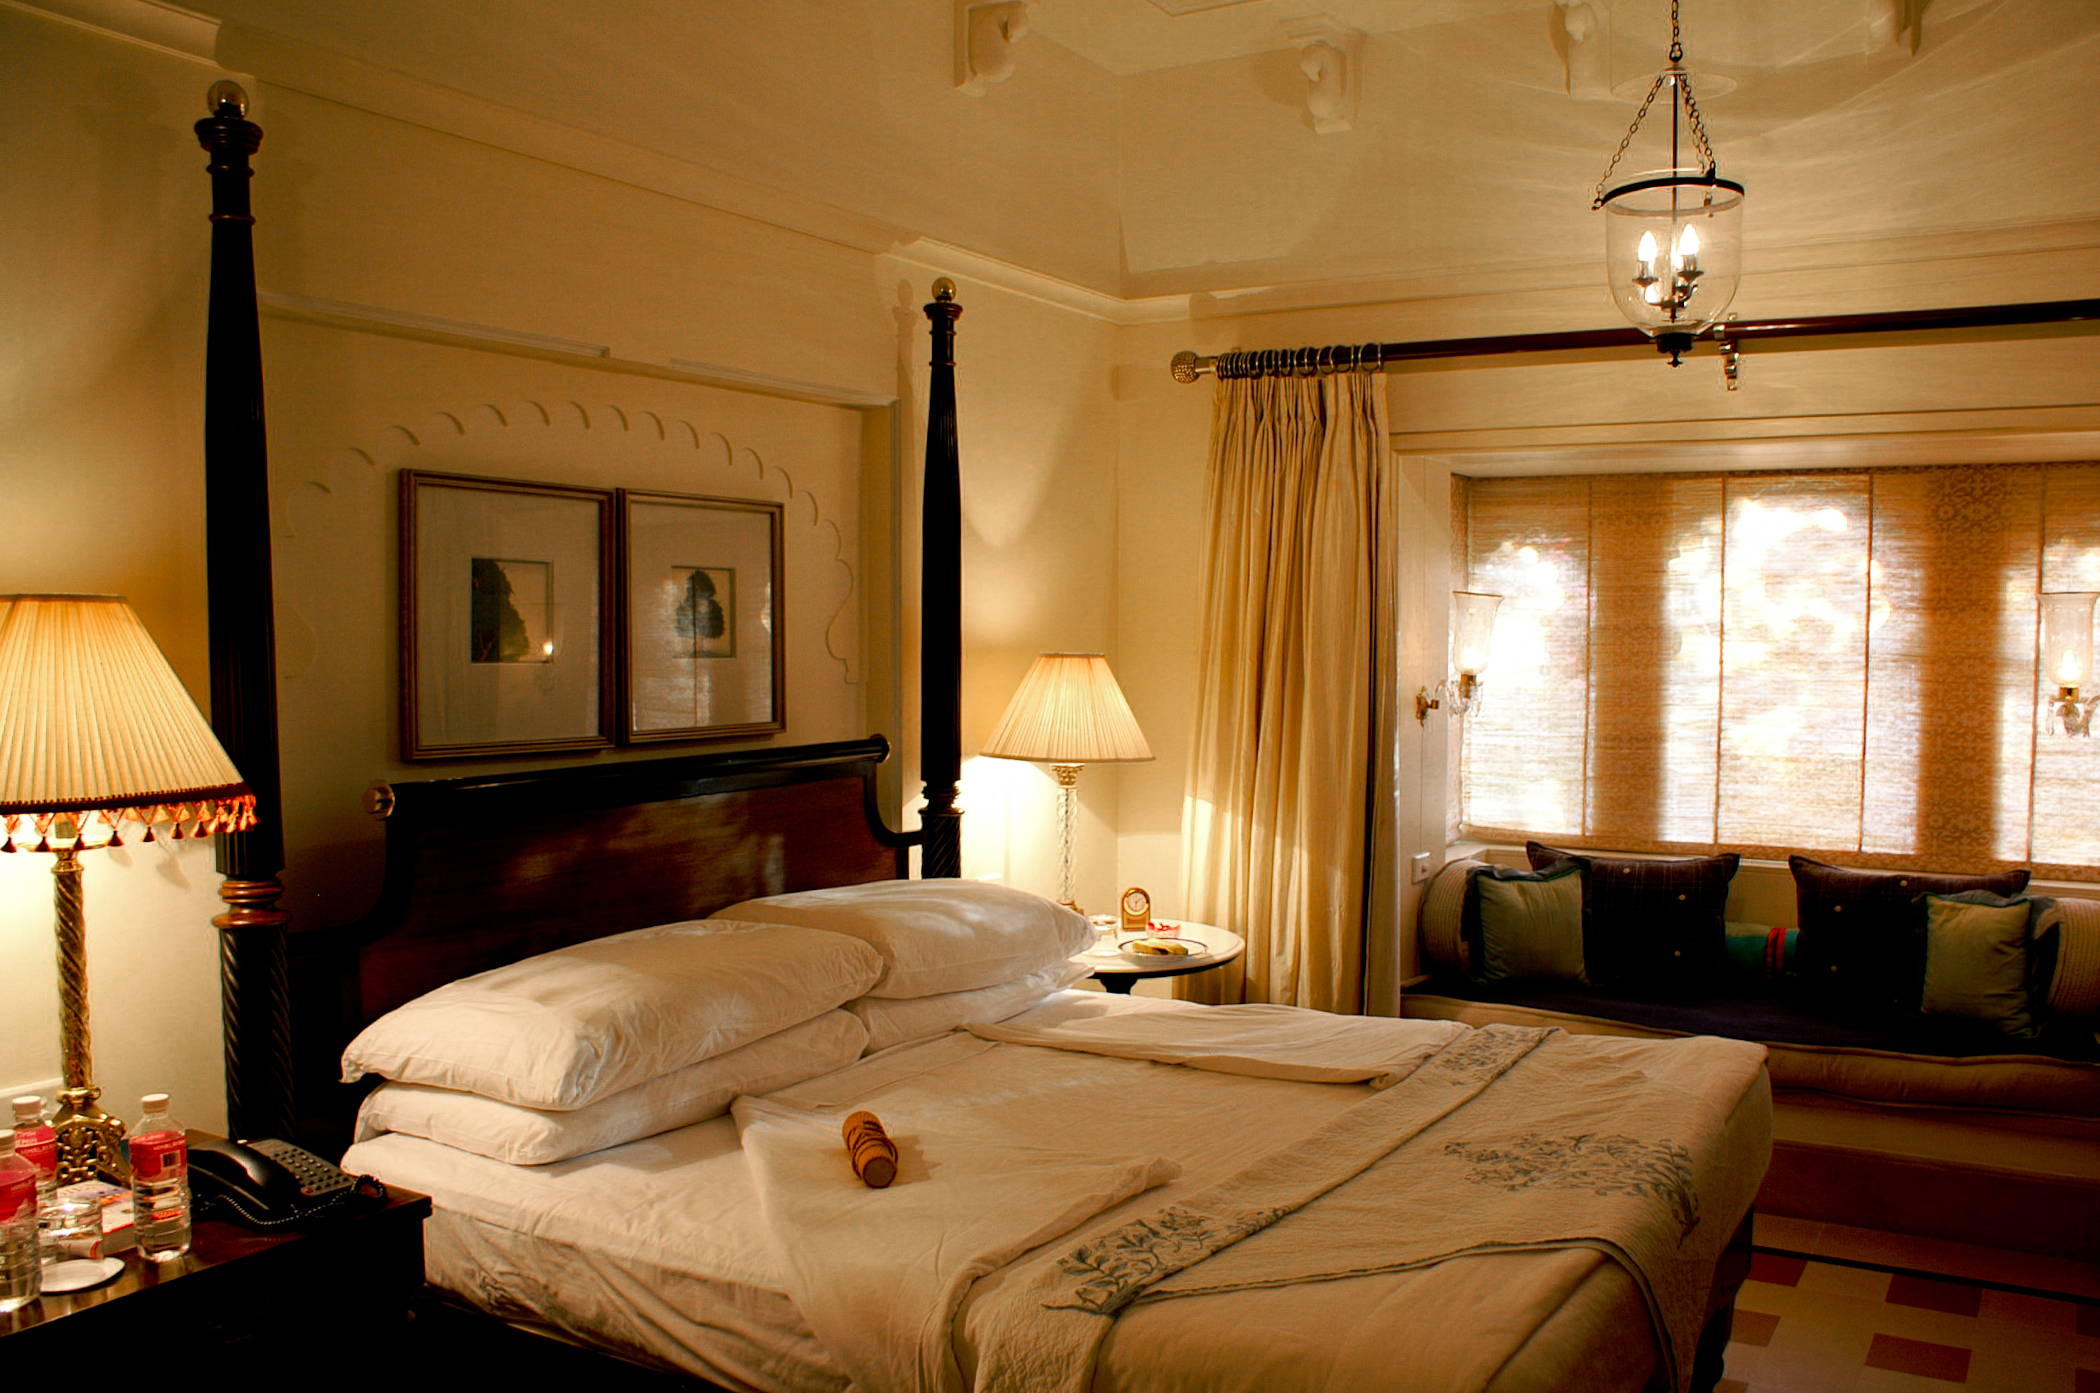 Oberoi Udaivilas hotel room with a king size bed